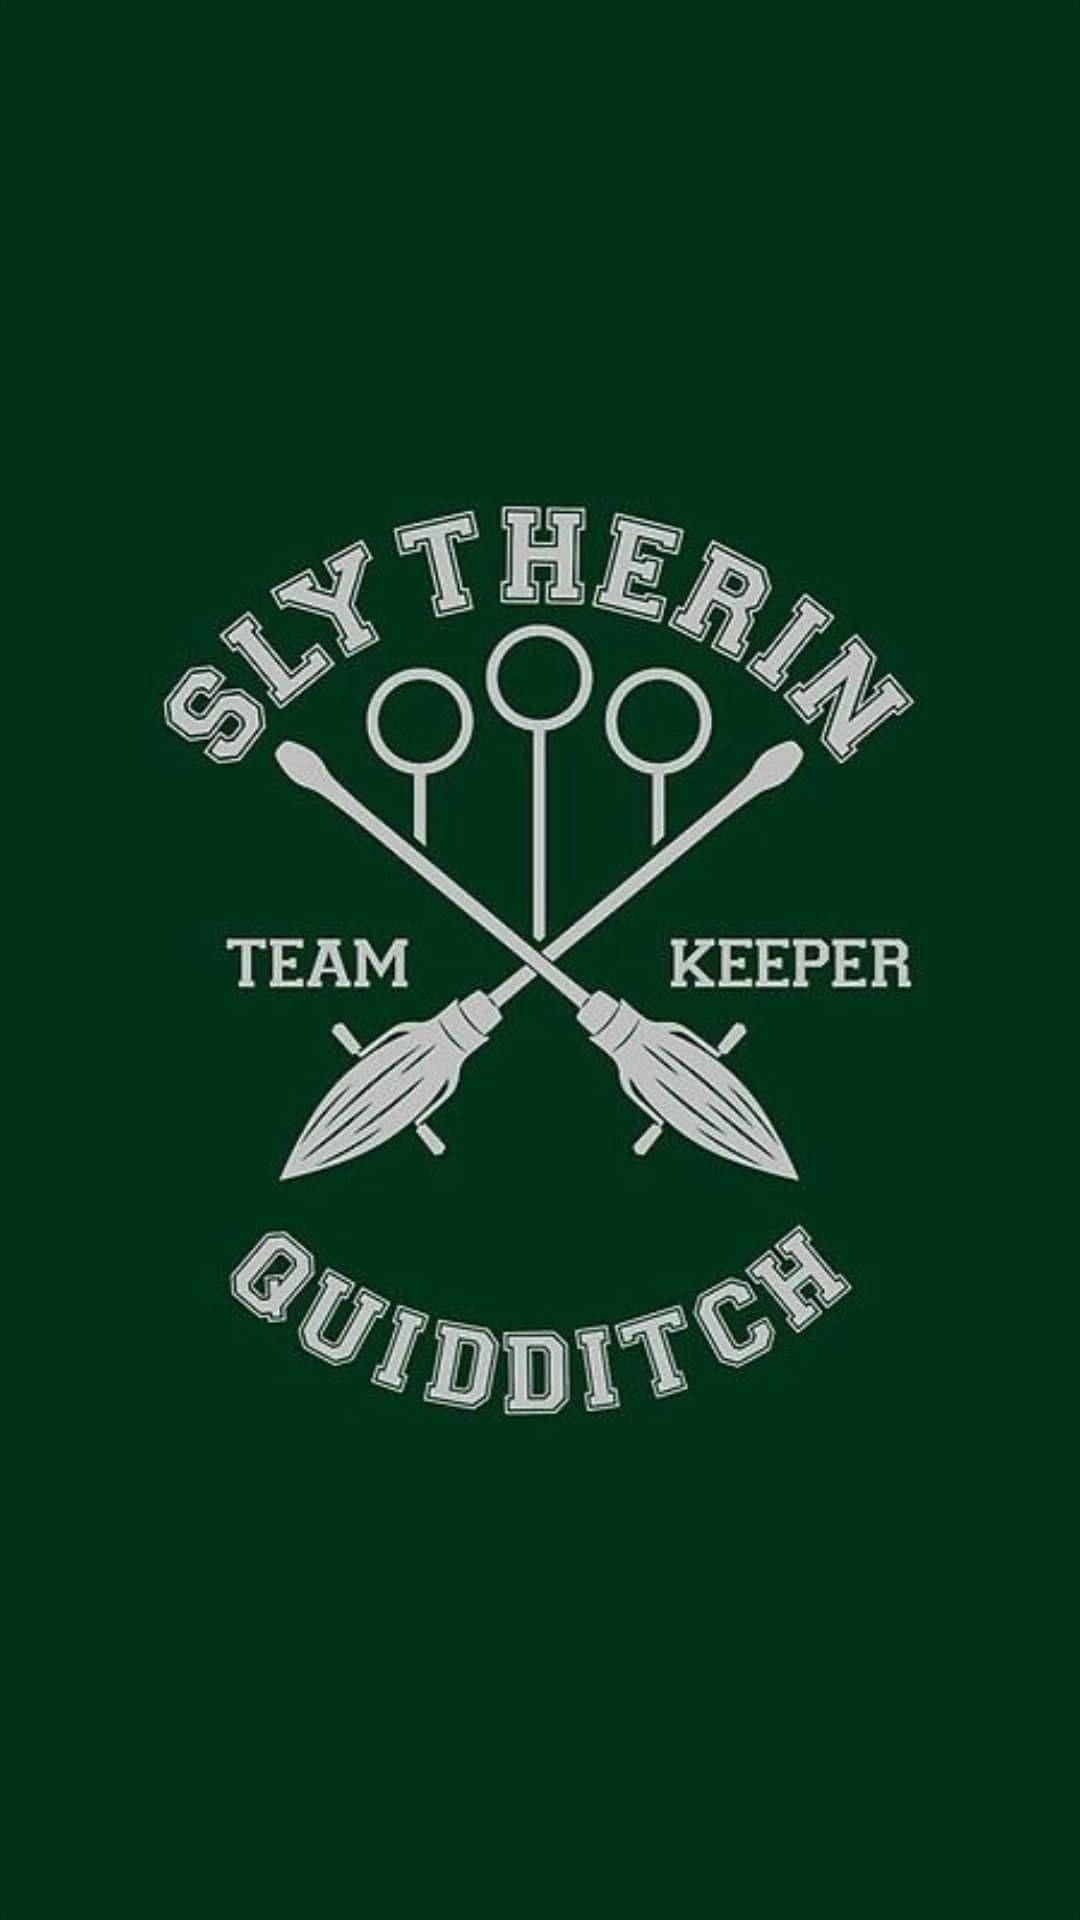 Harry potter slytherin team keeper quidditch wallpaper by ... - Slytherin